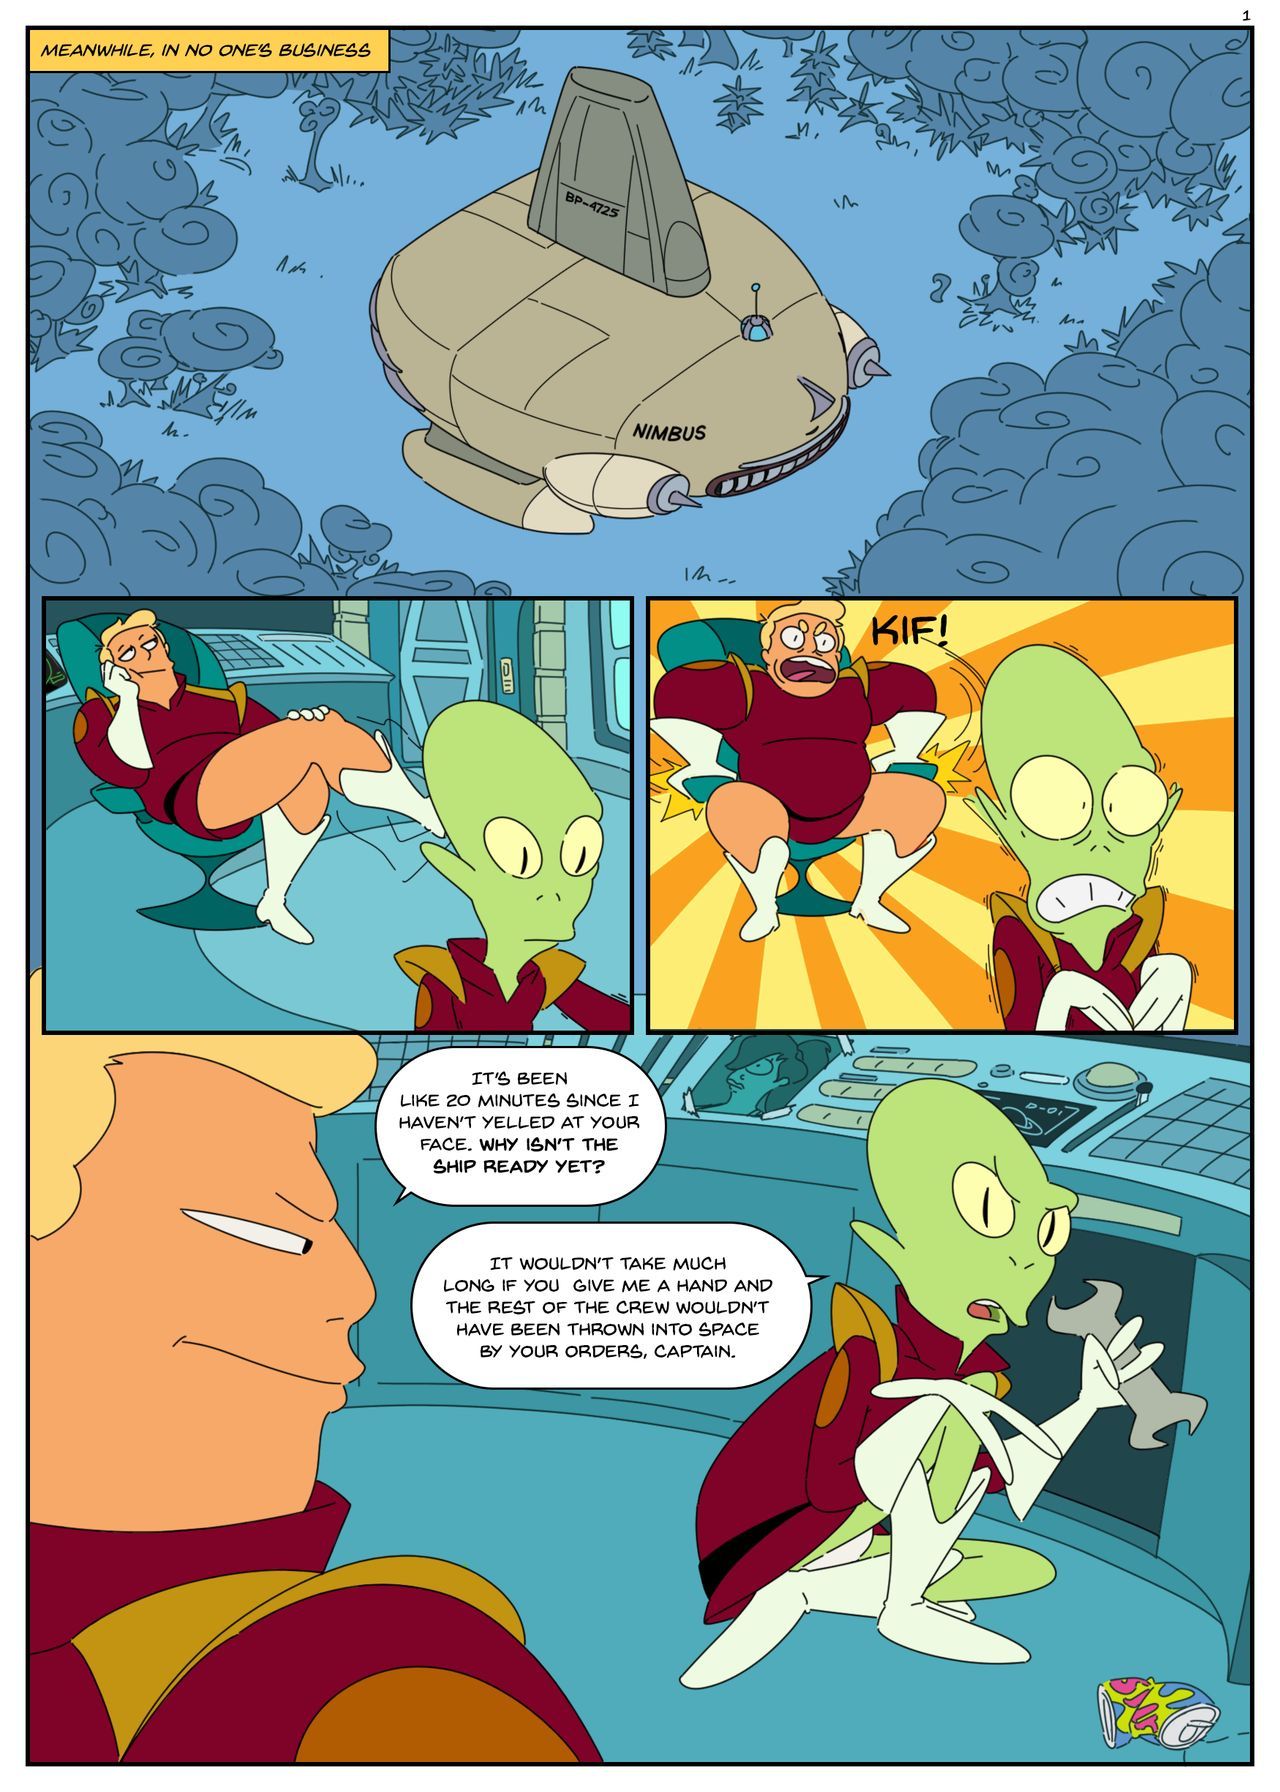 ZAPP BRANNIGAN & THE MISTERIOUS OMICRONIAN 2